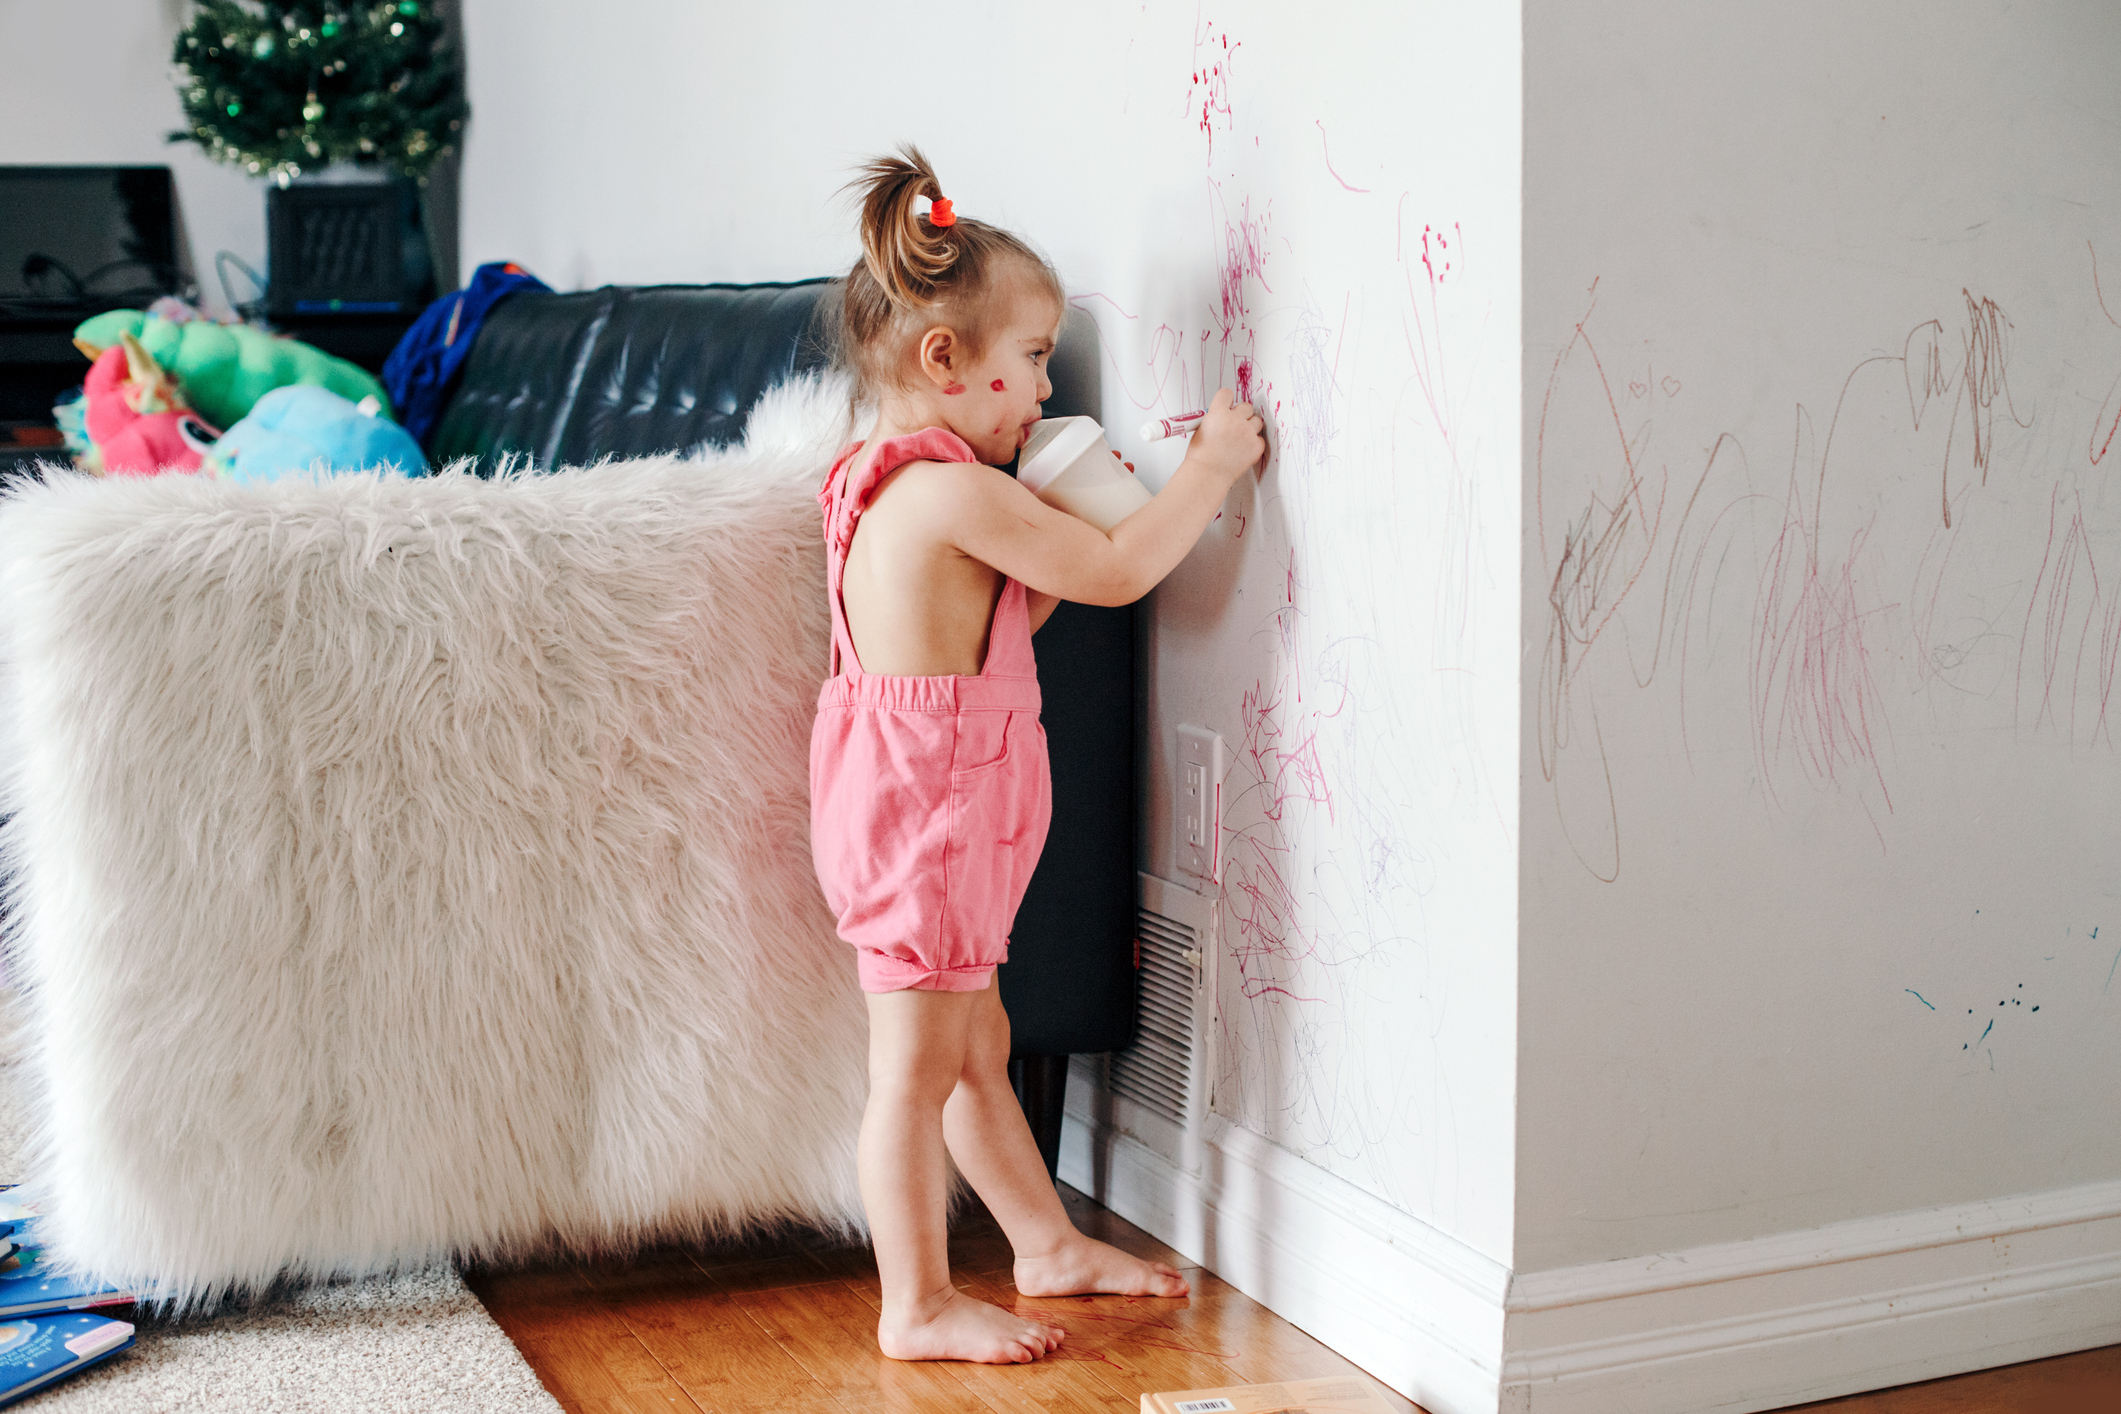 A toddler drawing on a wall next to a sofa and toys